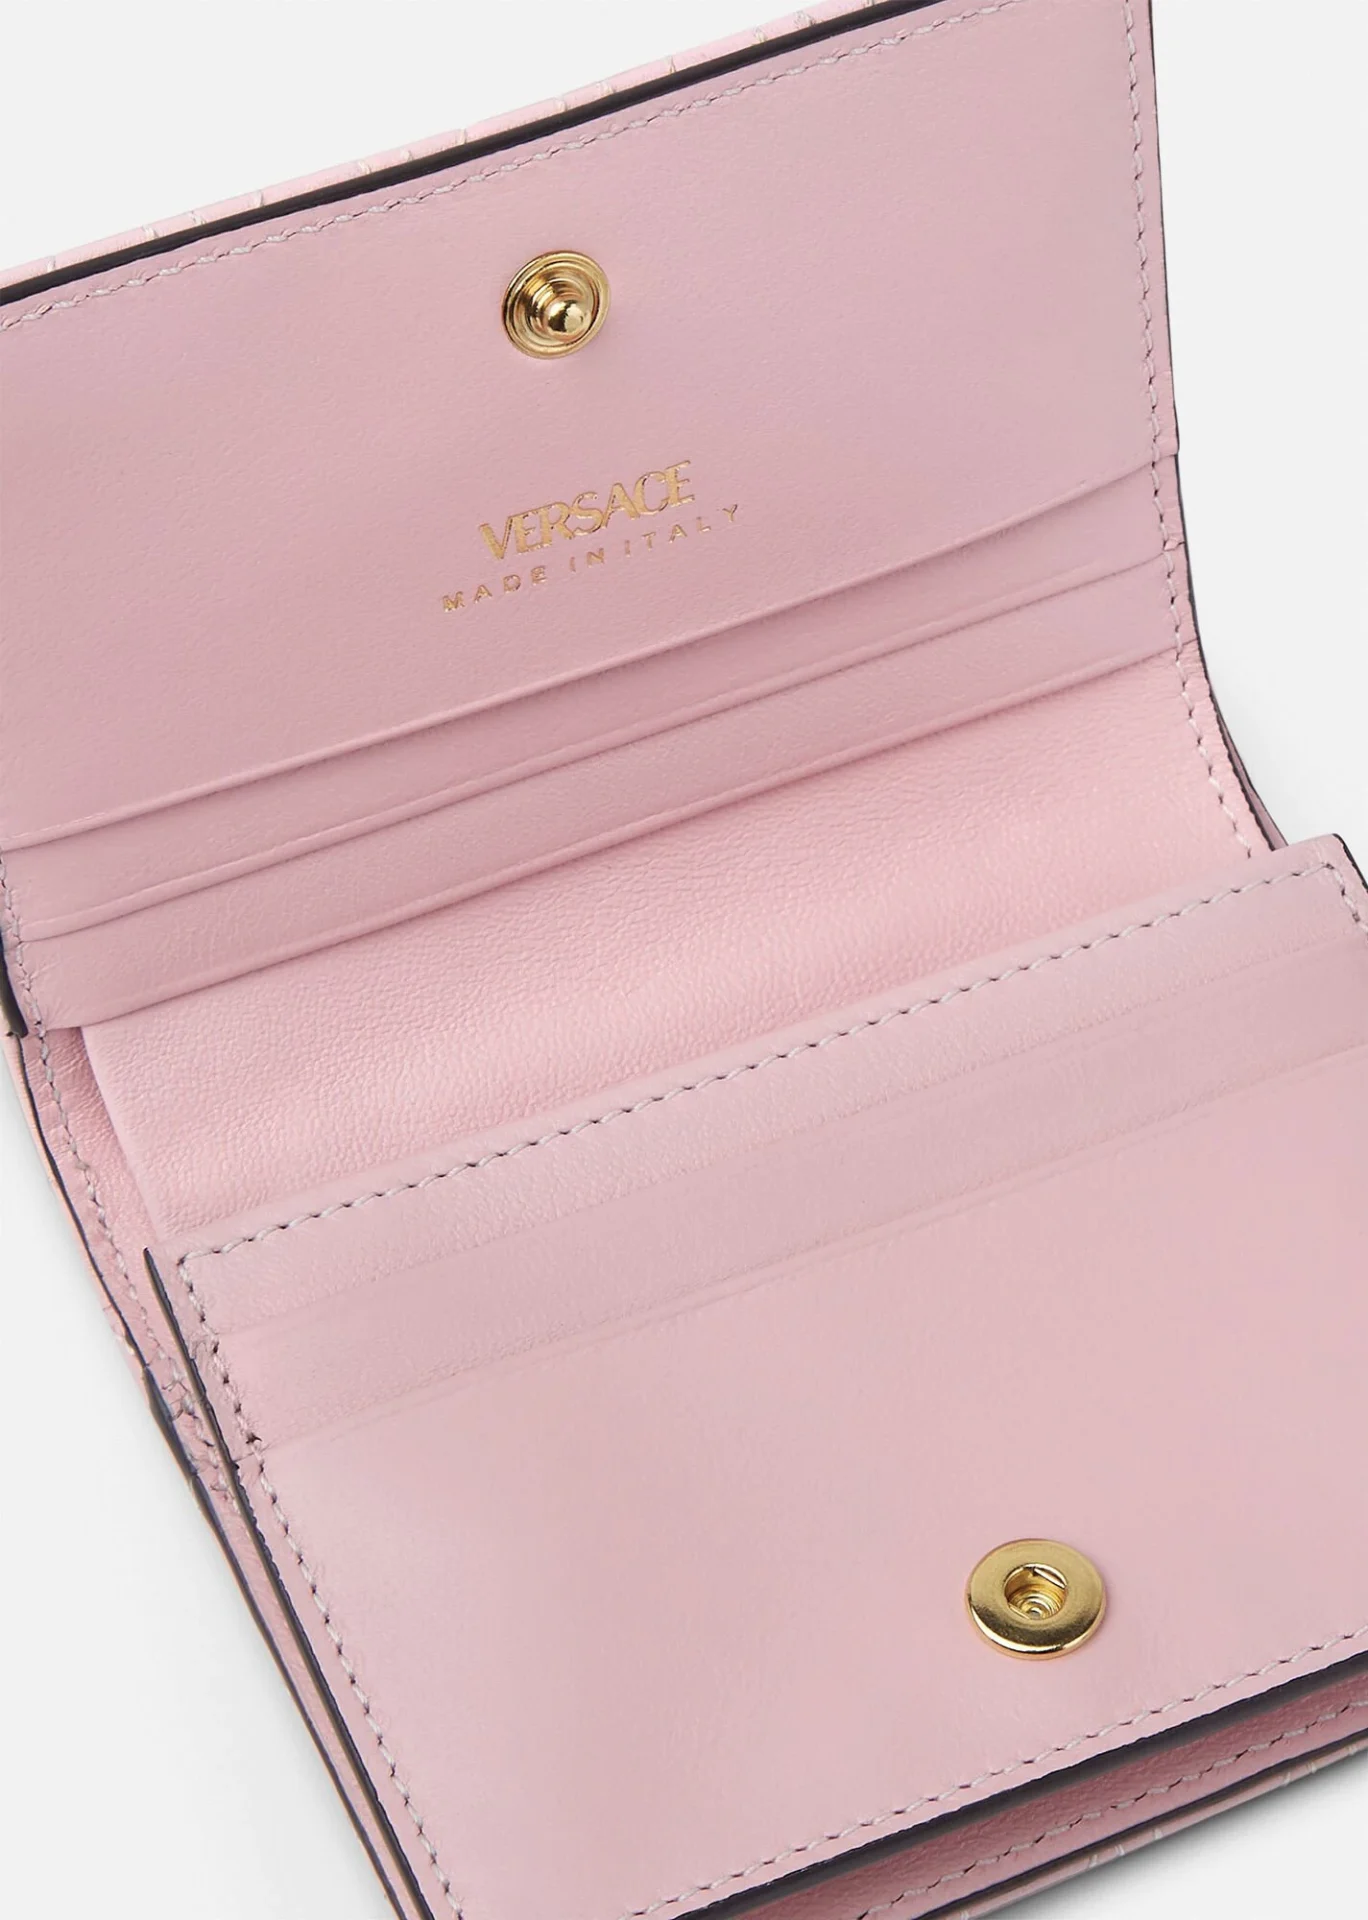 Shop Versace Virtus Quilted Leather Bi-Fold Wallet